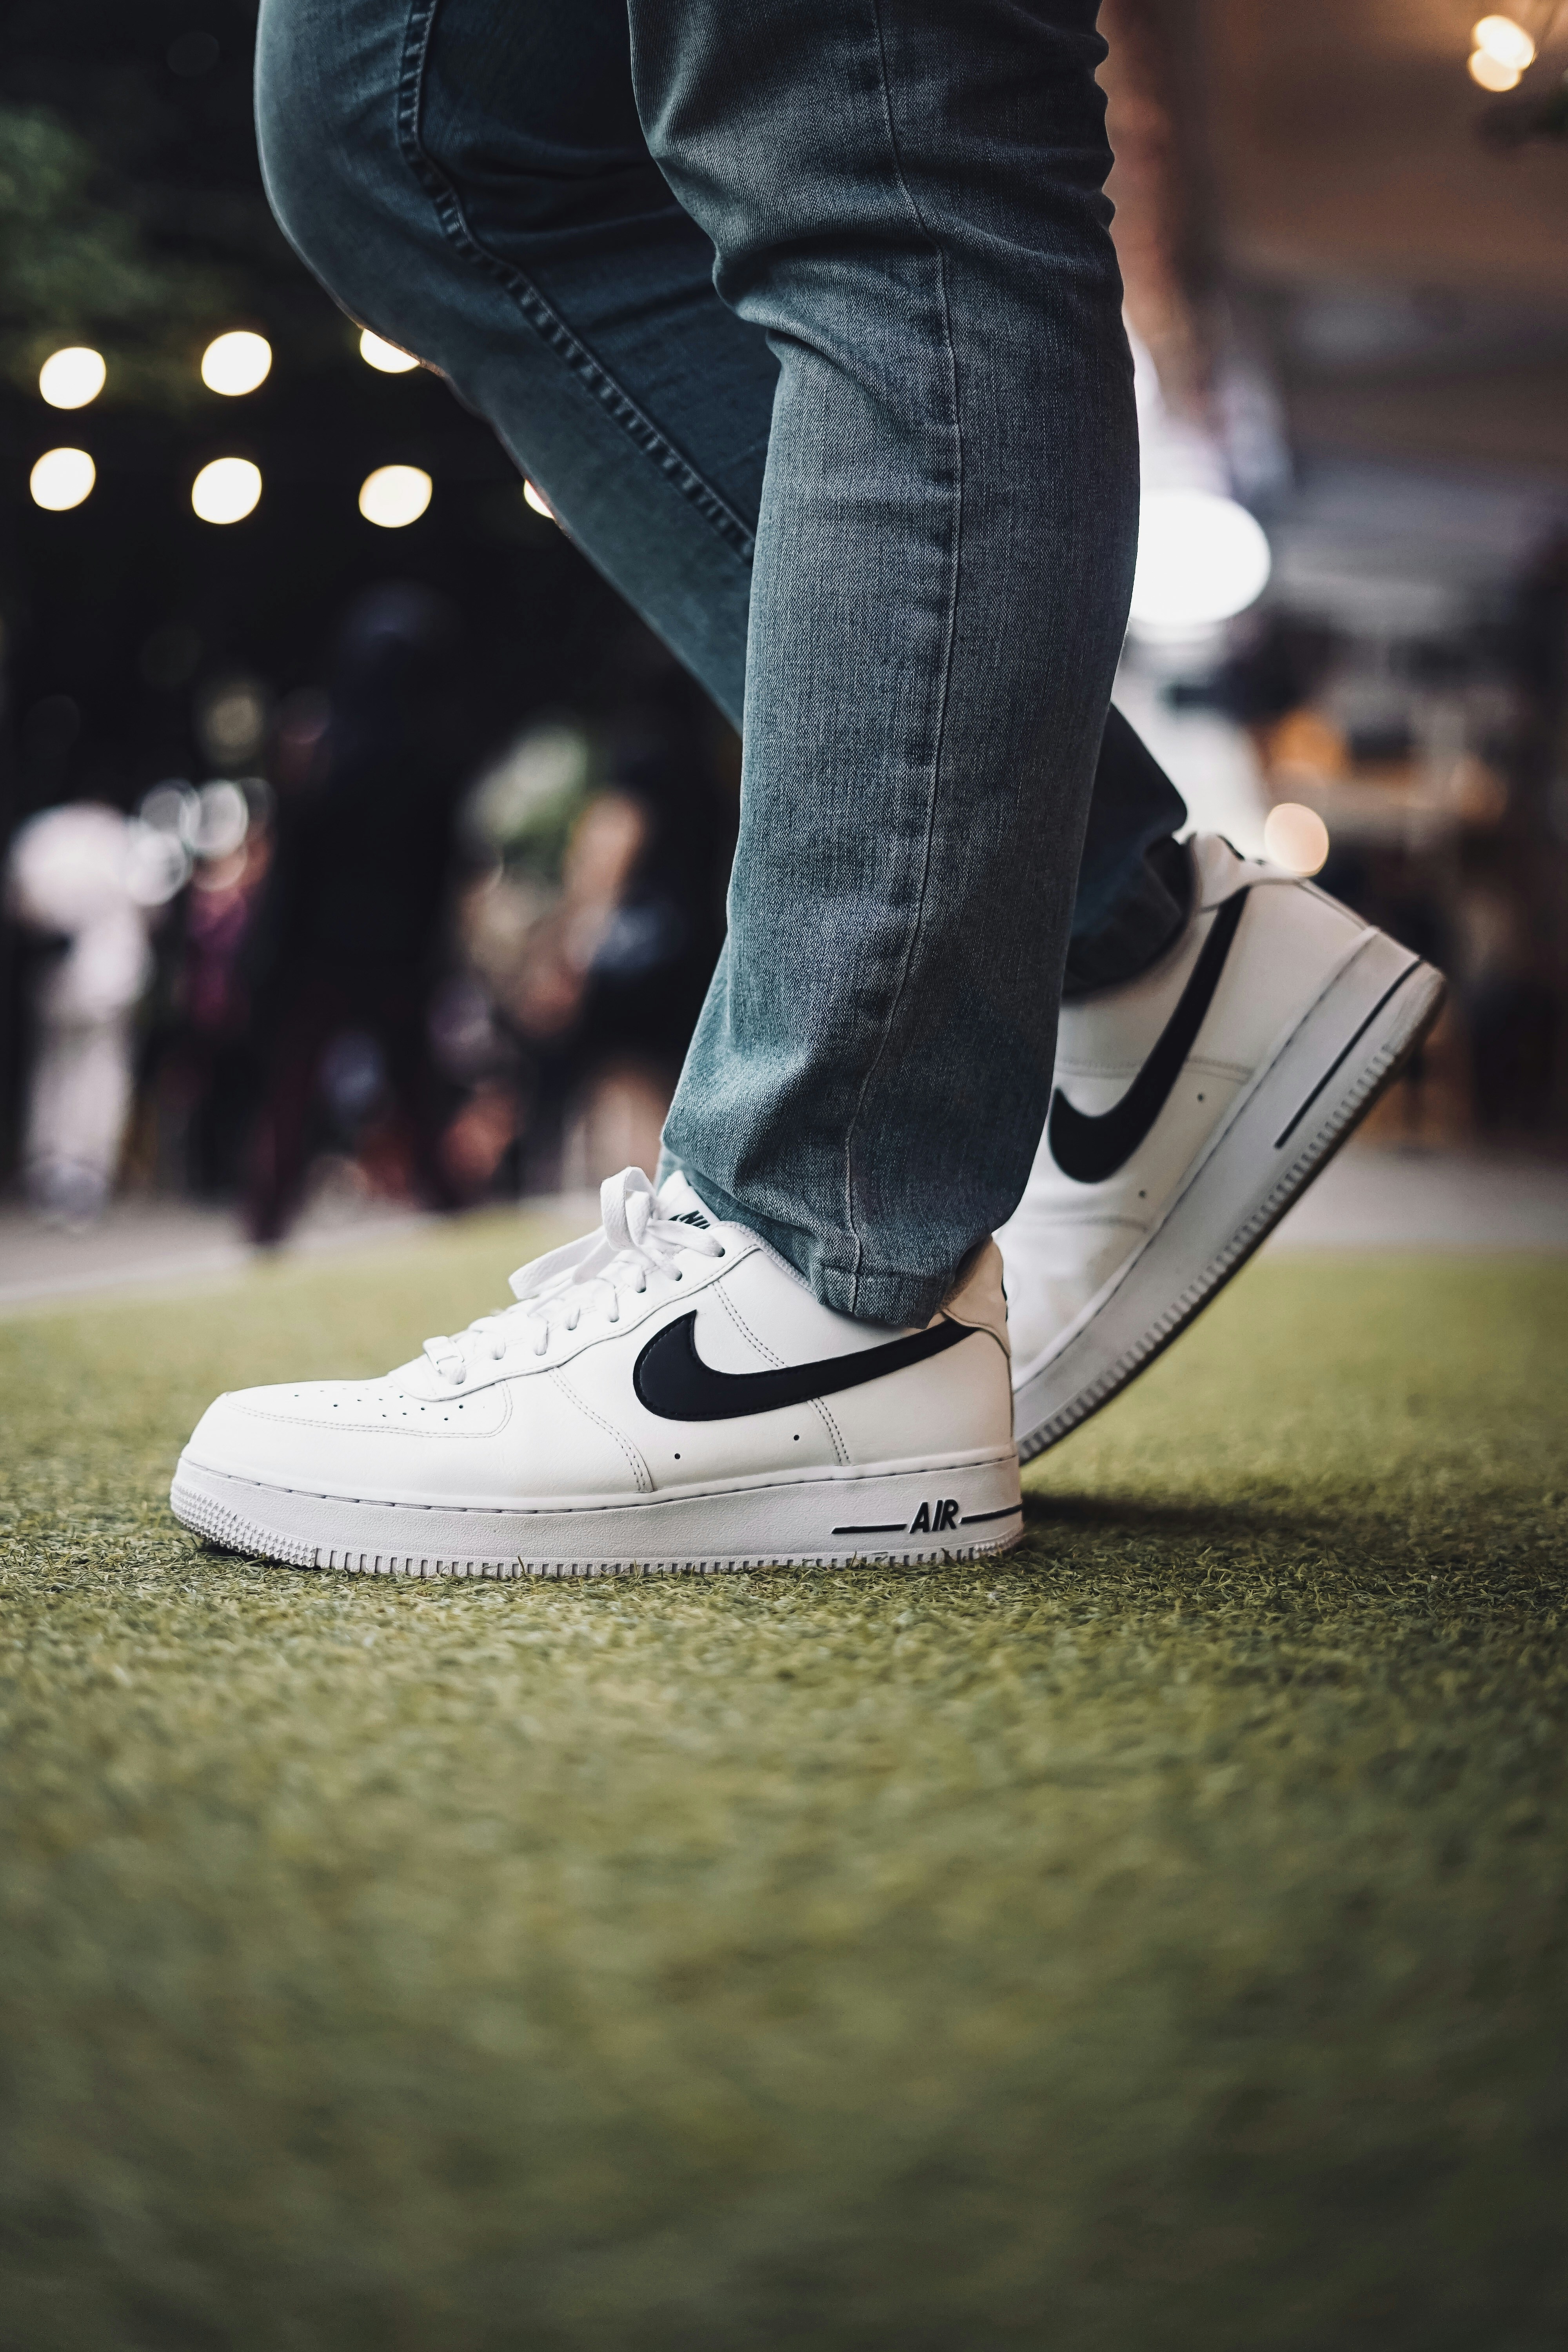 jeans that go with air force 1